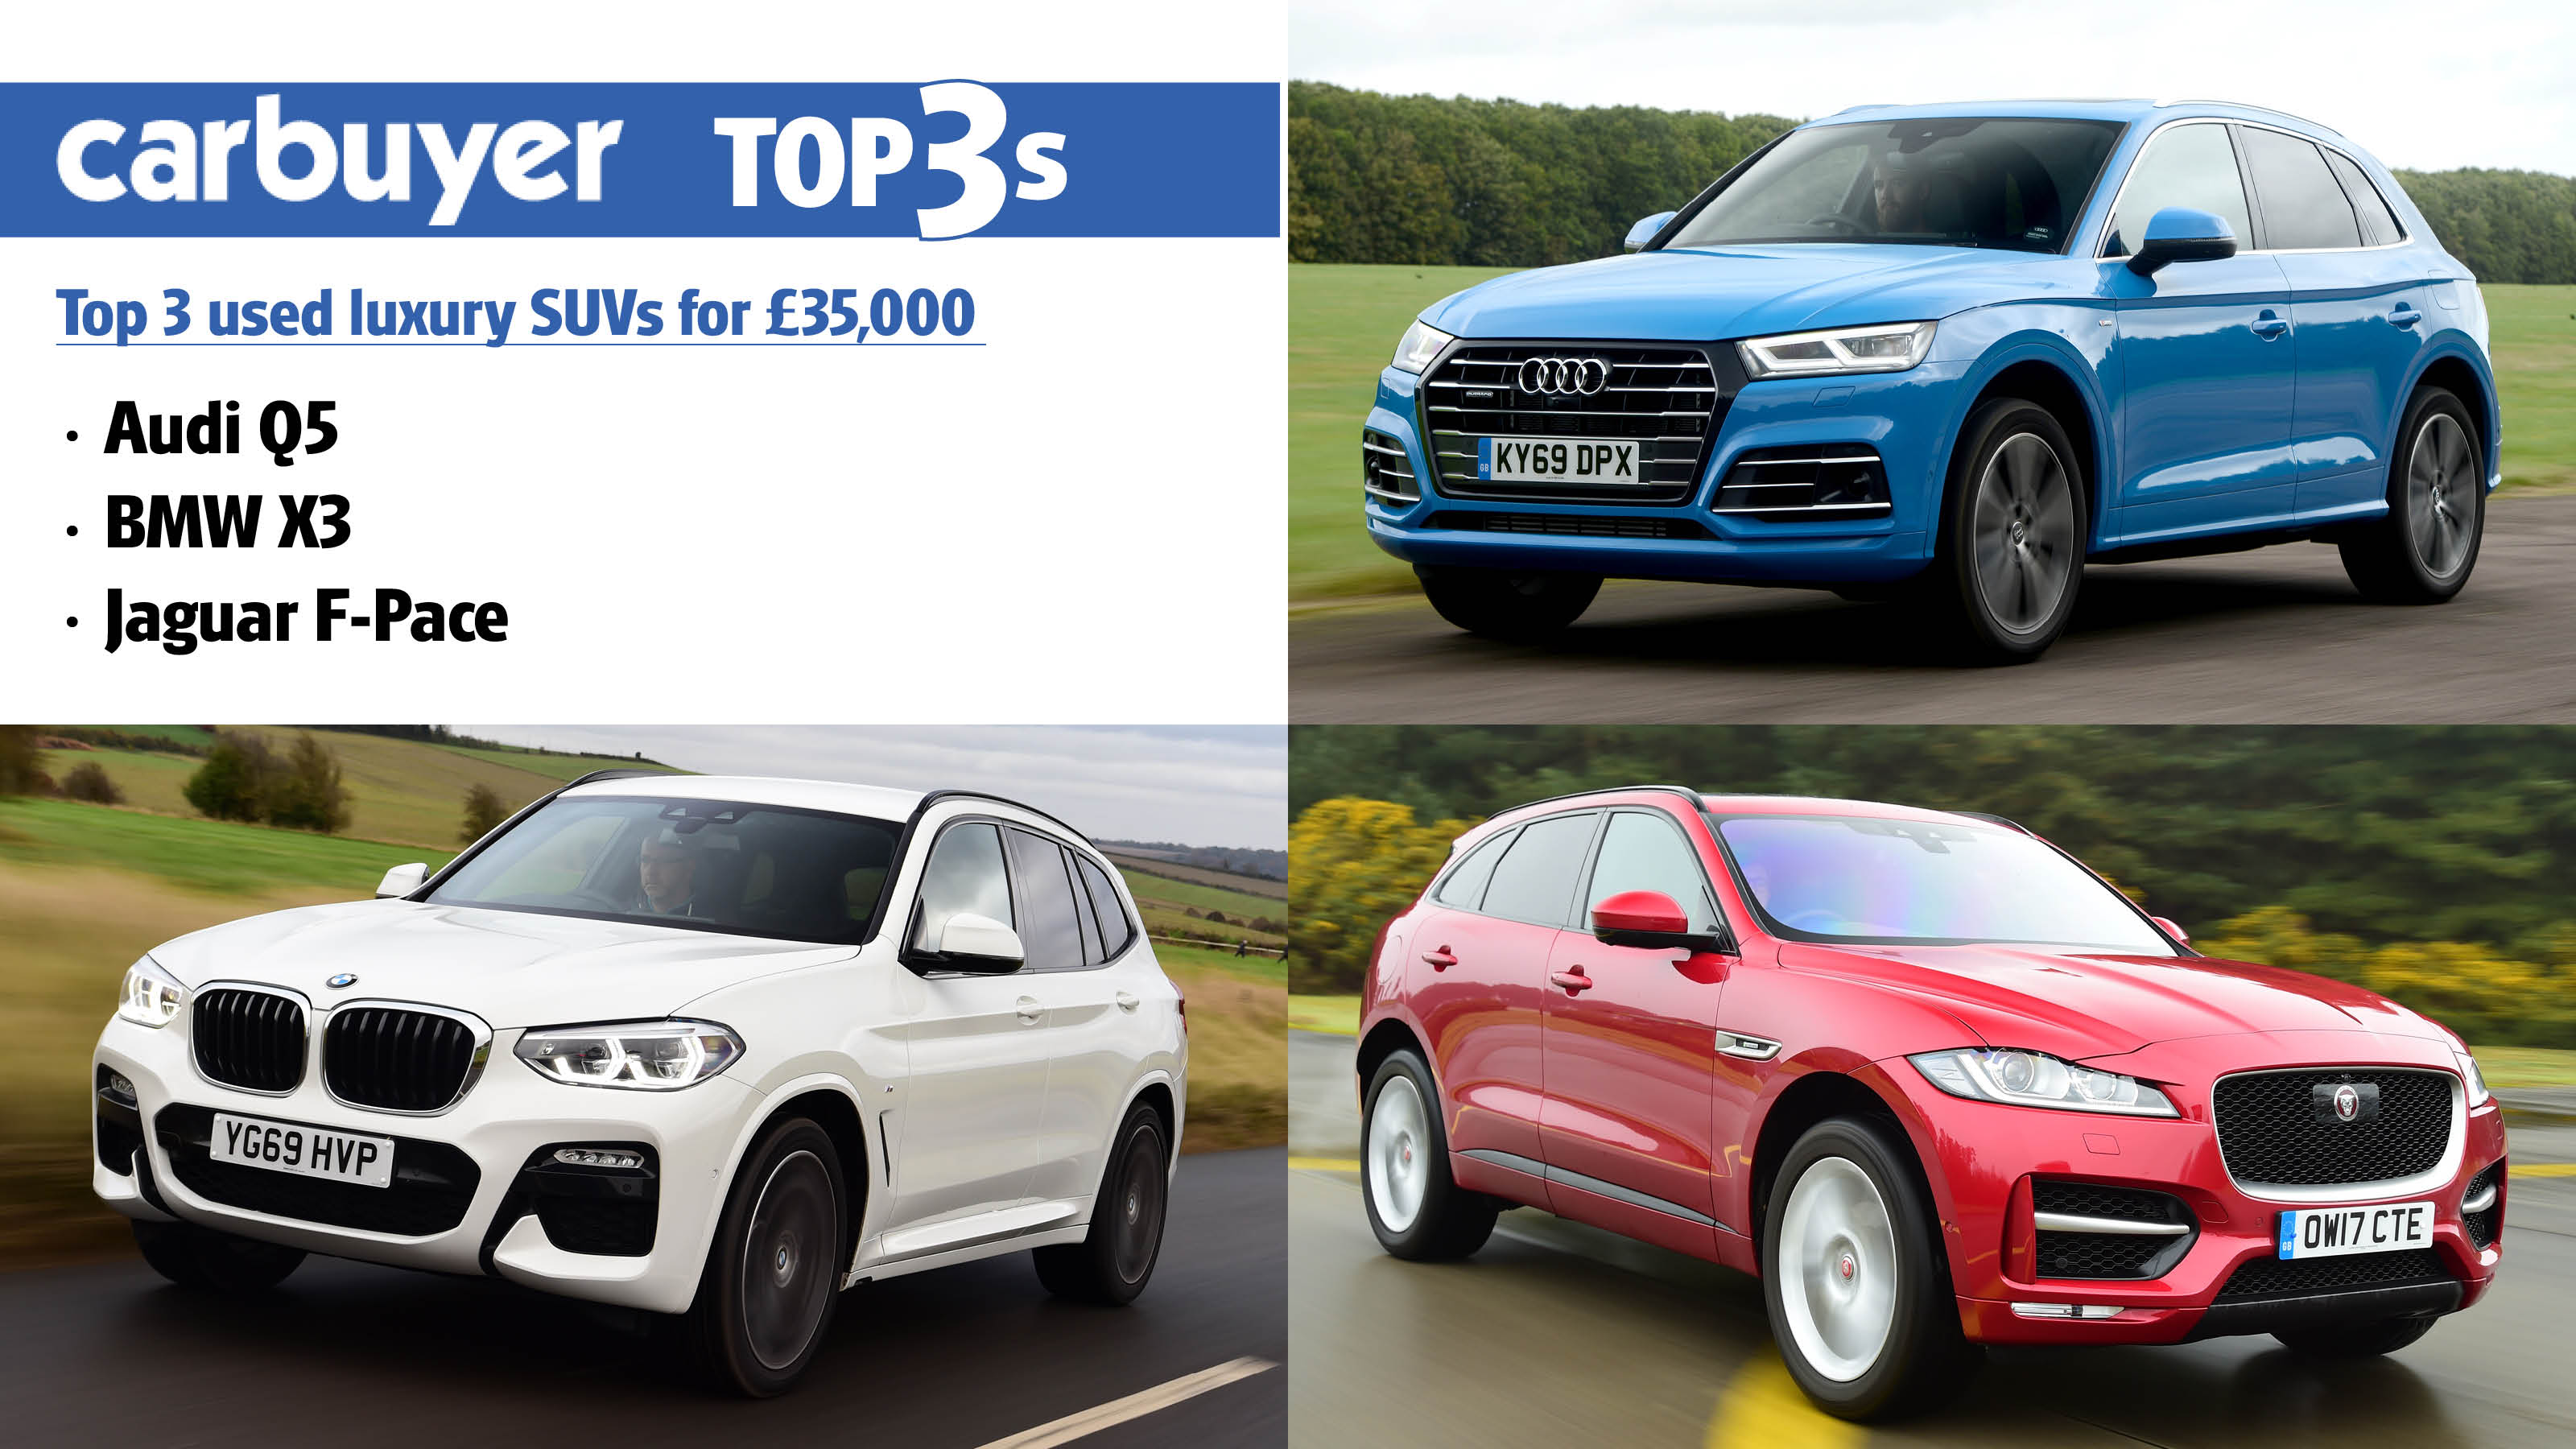 Top 3 used luxury SUVs for £35,000 | Carbuyer